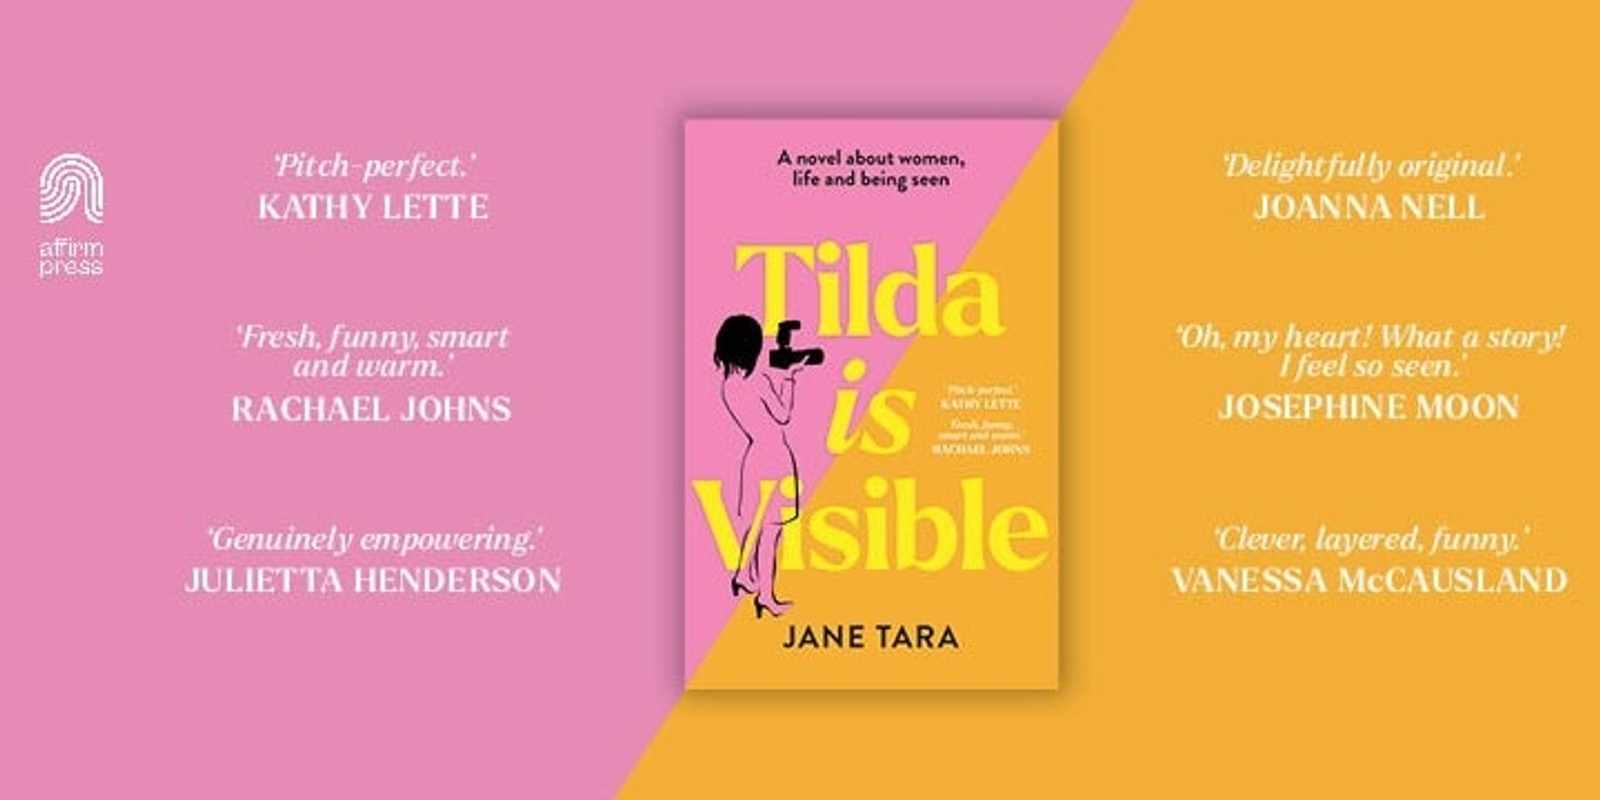 Banner image for Tilda is Visible with author Jane Tara